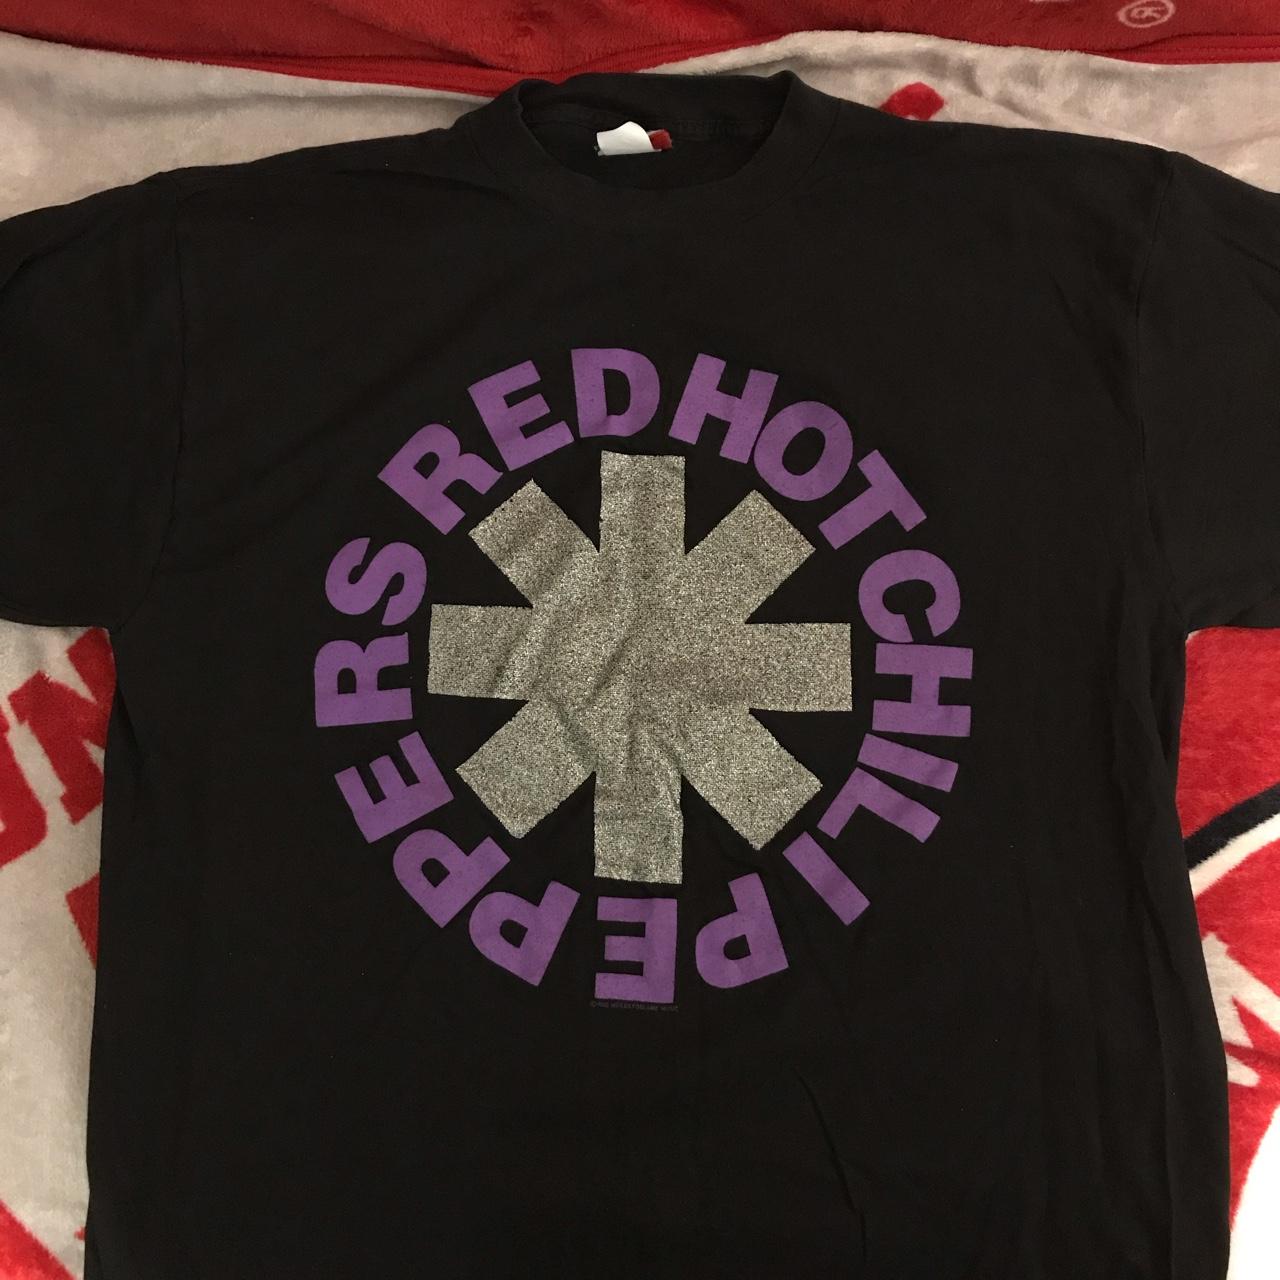 RED HOT CHILI PEPPERS true vintage 1992 tour shirt.... - Depop